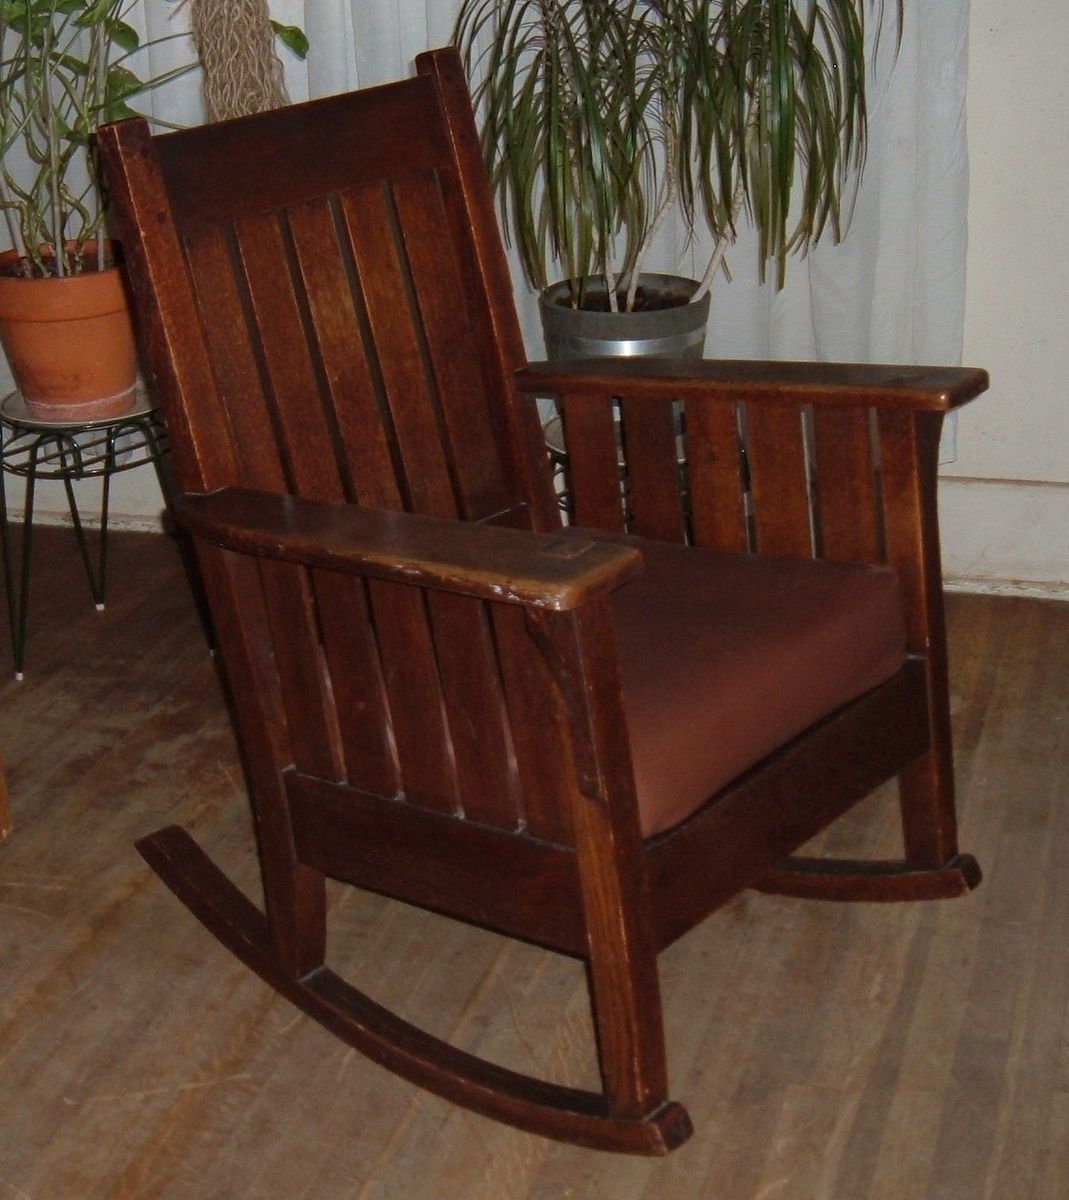 Types Of Antique Rocking Chairs | Antique Furniture Inside Old Fashioned Rocking Chairs (View 15 of 15)